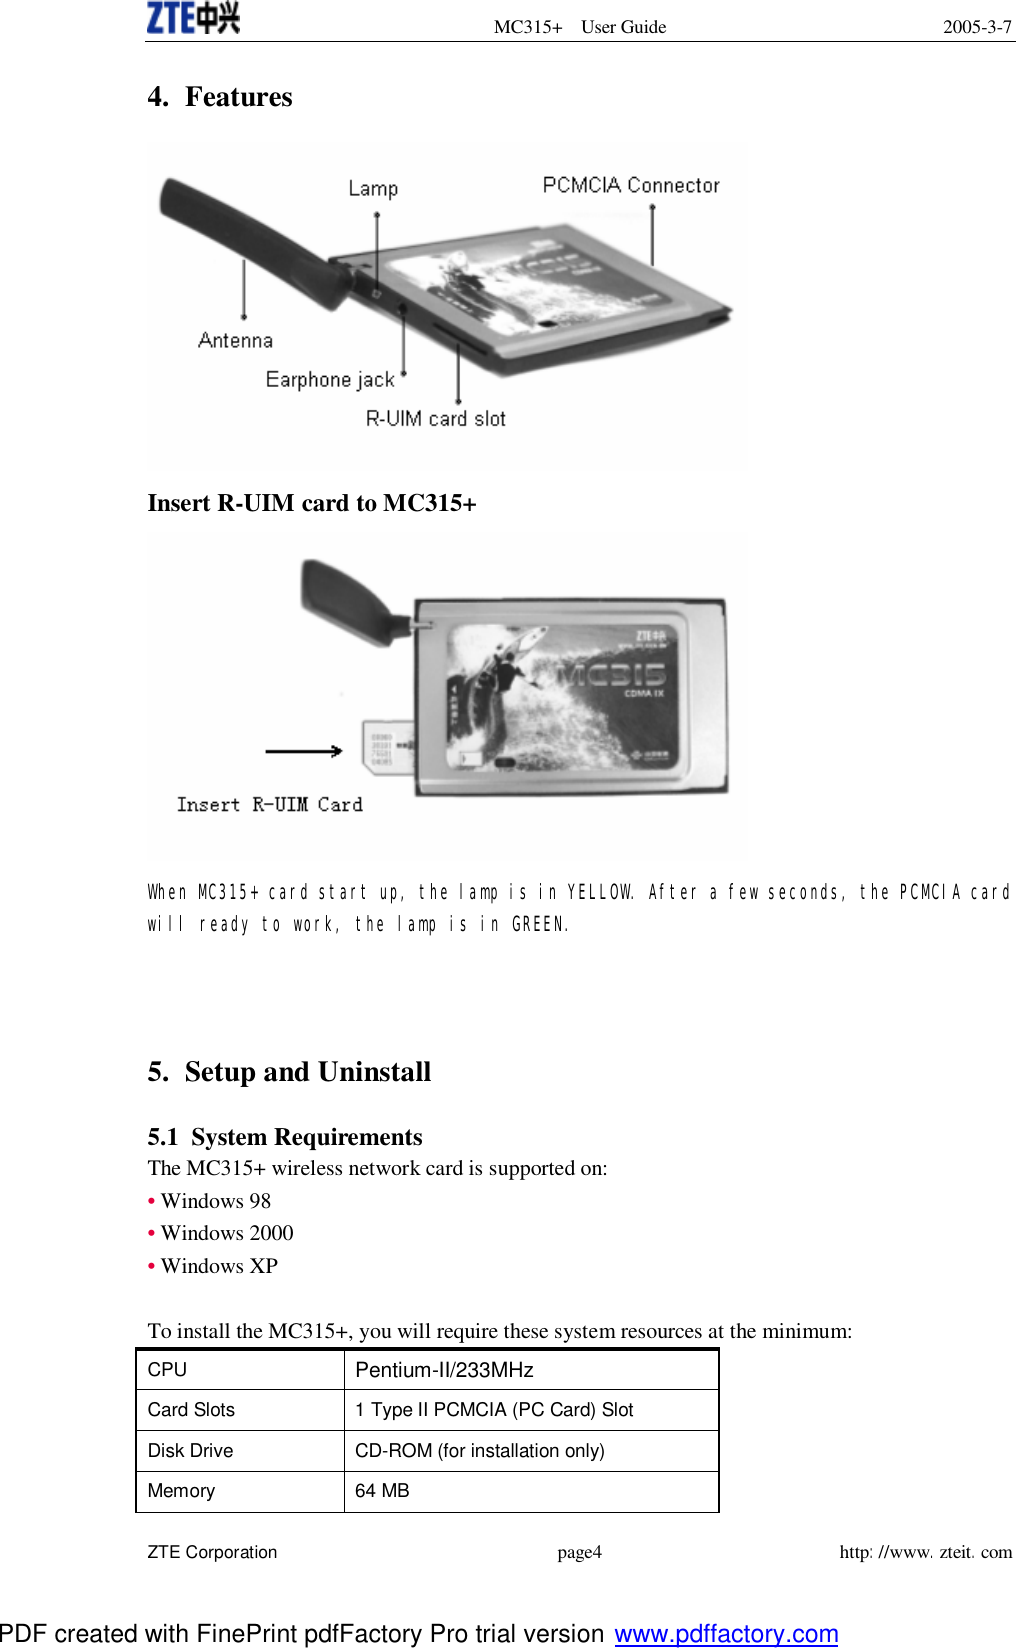  MC315+ User Guide 2005-3-7  ZTE Corporation page4 http://www.zteit.com 4. Features   Insert R-UIM card to MC315+  When MC315+ card start up, the lamp is in YELLOW. After a few seconds, the PCMCIA card will ready to work, the lamp is in GREEN.      5. Setup and Uninstall  5.1 System Requirements The MC315+ wireless network card is supported on: • Windows 98  • Windows 2000 • Windows XP   To install the MC315+, you will require these system resources at the minimum: CPU  Pentium-II/233MHz Card Slots  1 Type II PCMCIA (PC Card) Slot  Disk Drive  CD-ROM (for installation only)  Memory  64 MB  PDF created with FinePrint pdfFactory Pro trial version www.pdffactory.com